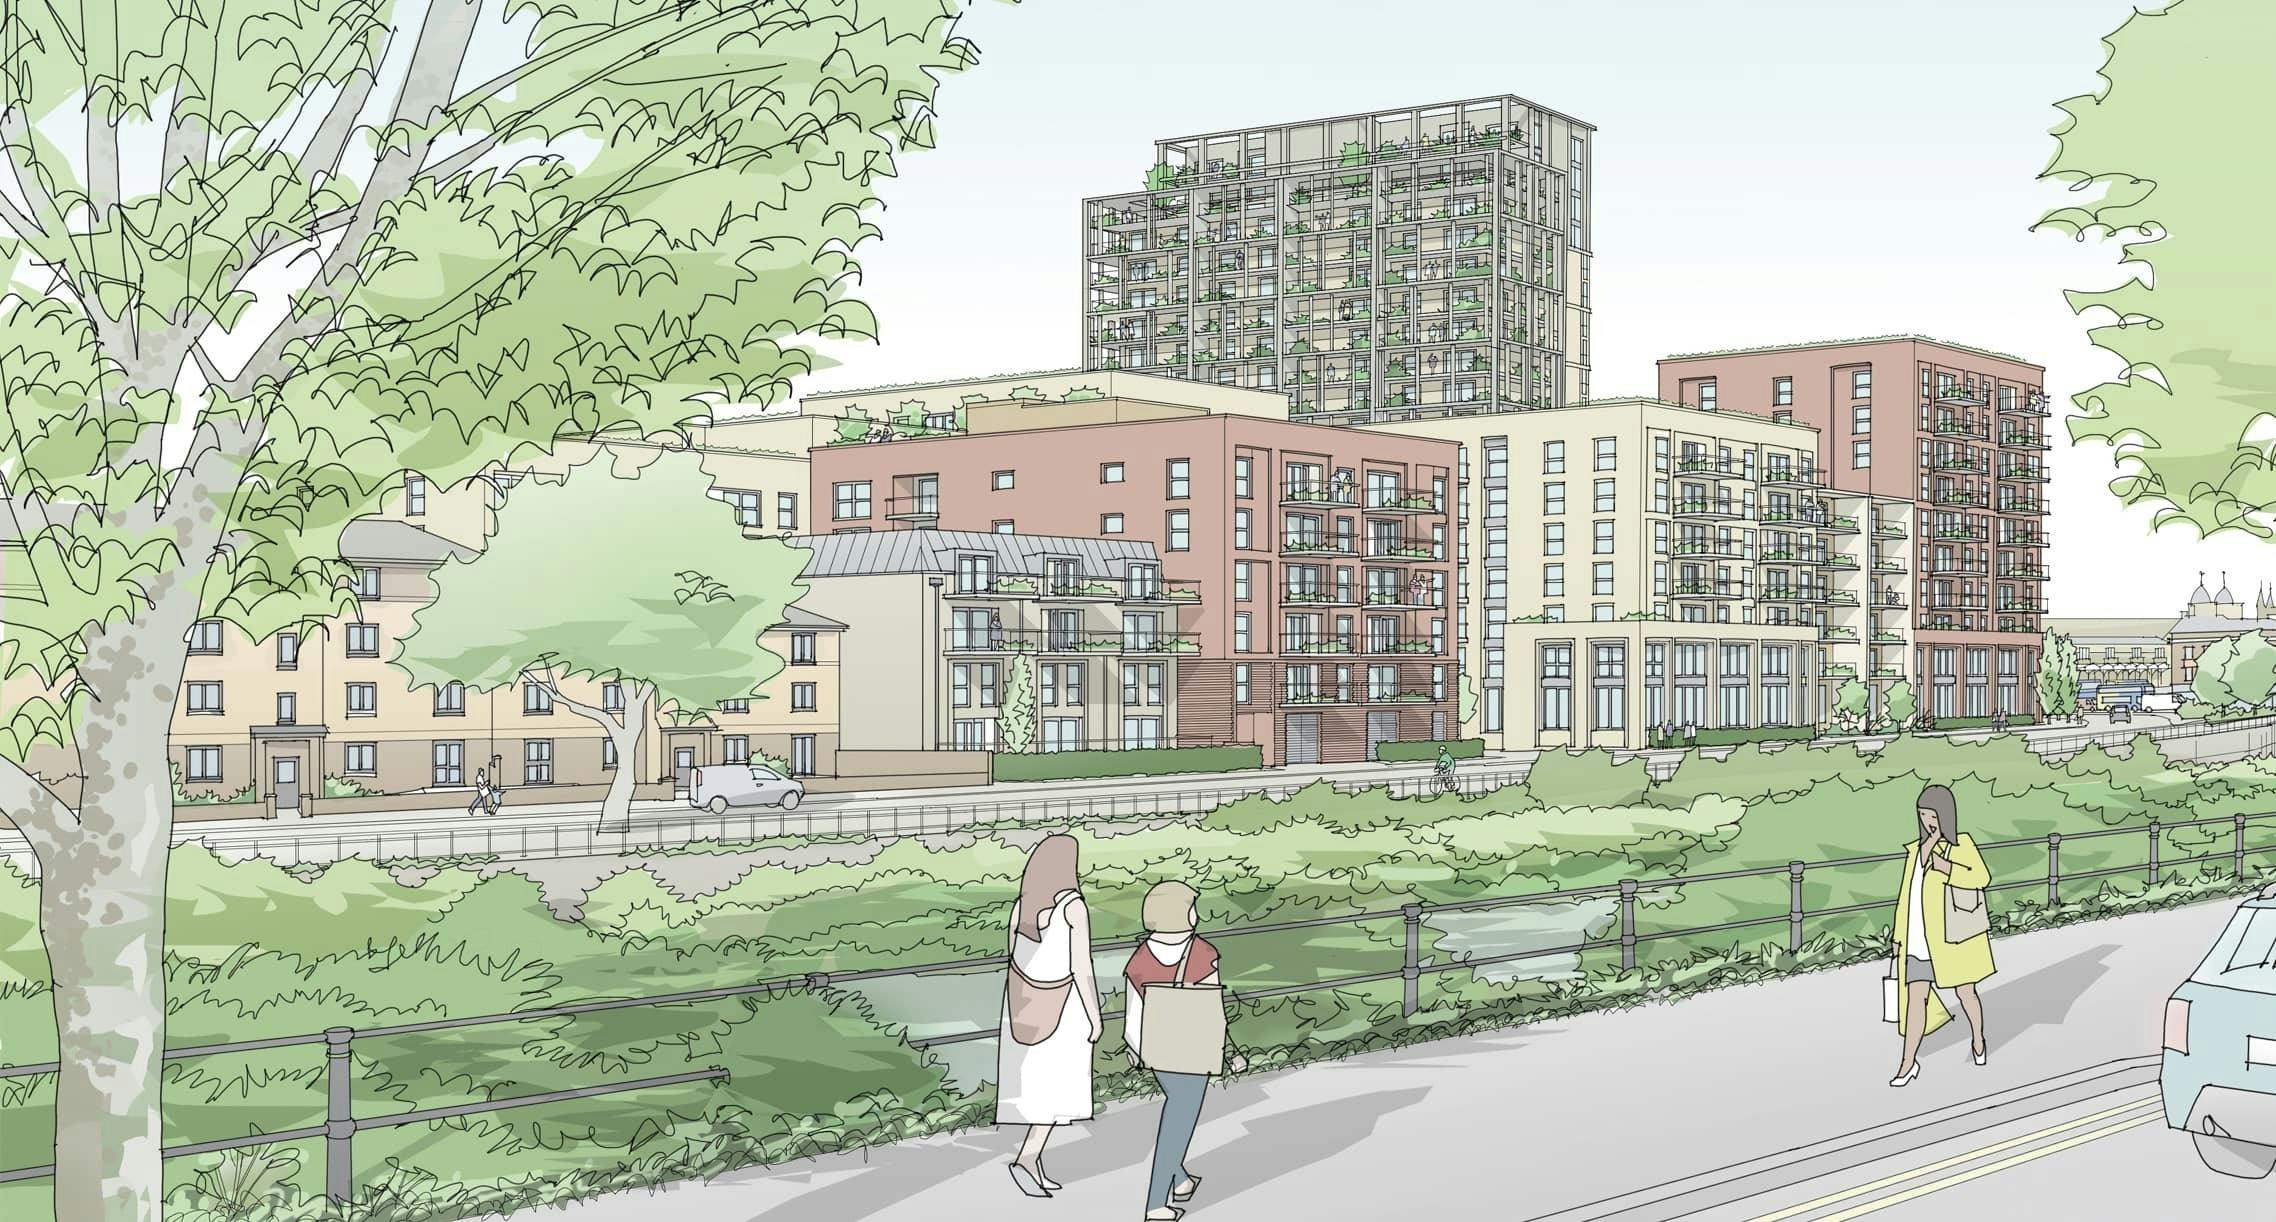 Illustrated view of Clarence Road by Dandara Living from across the River Avon